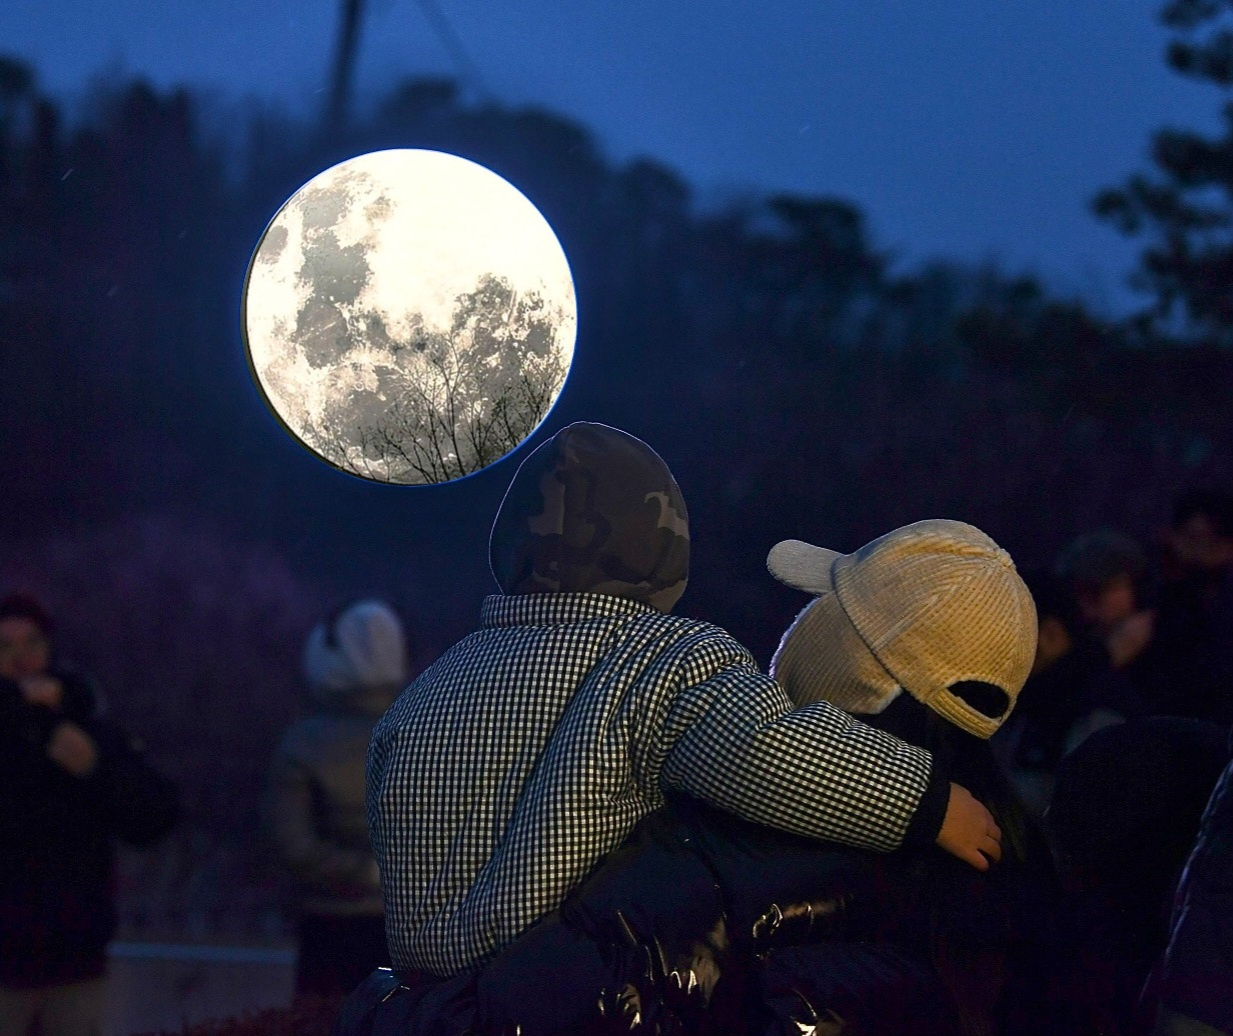 Visitors enjoy moon-shaped light fixture during Aegibong Moonlight Light Show at Aegibong Peace Ecopark on Saturday. (Gimpo City)